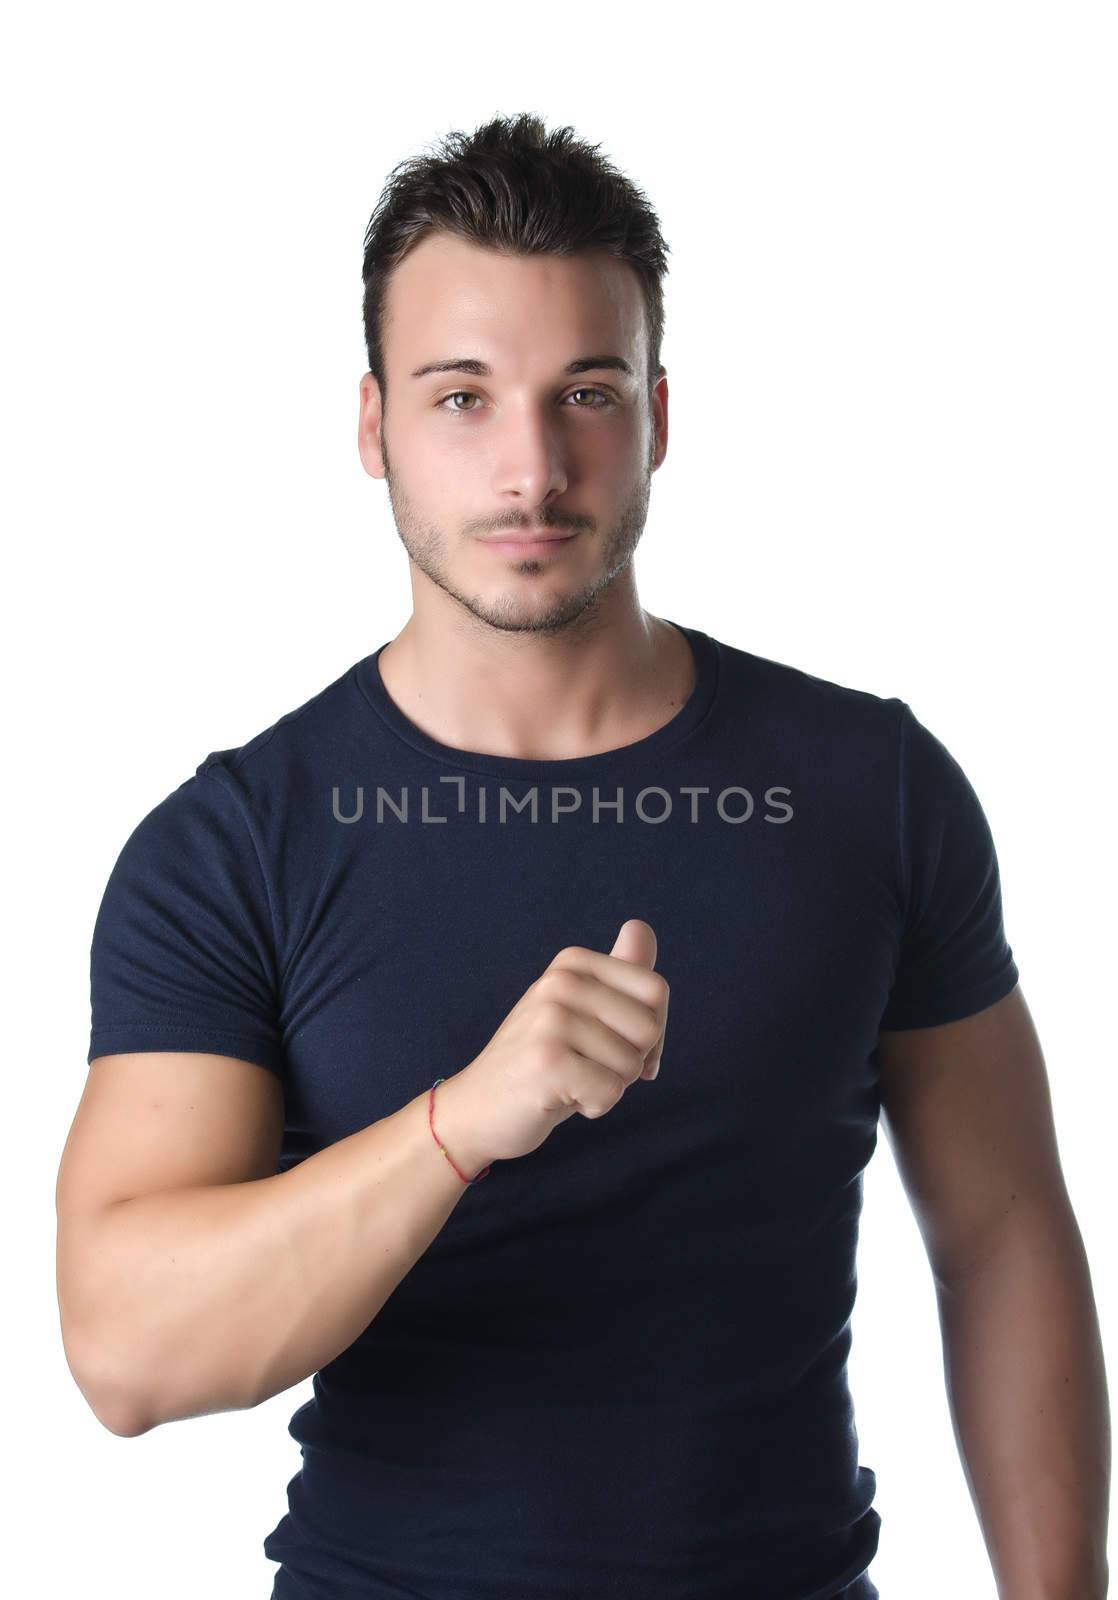 Attractive and athletic young man pointing thumb finger at himself, confident expression